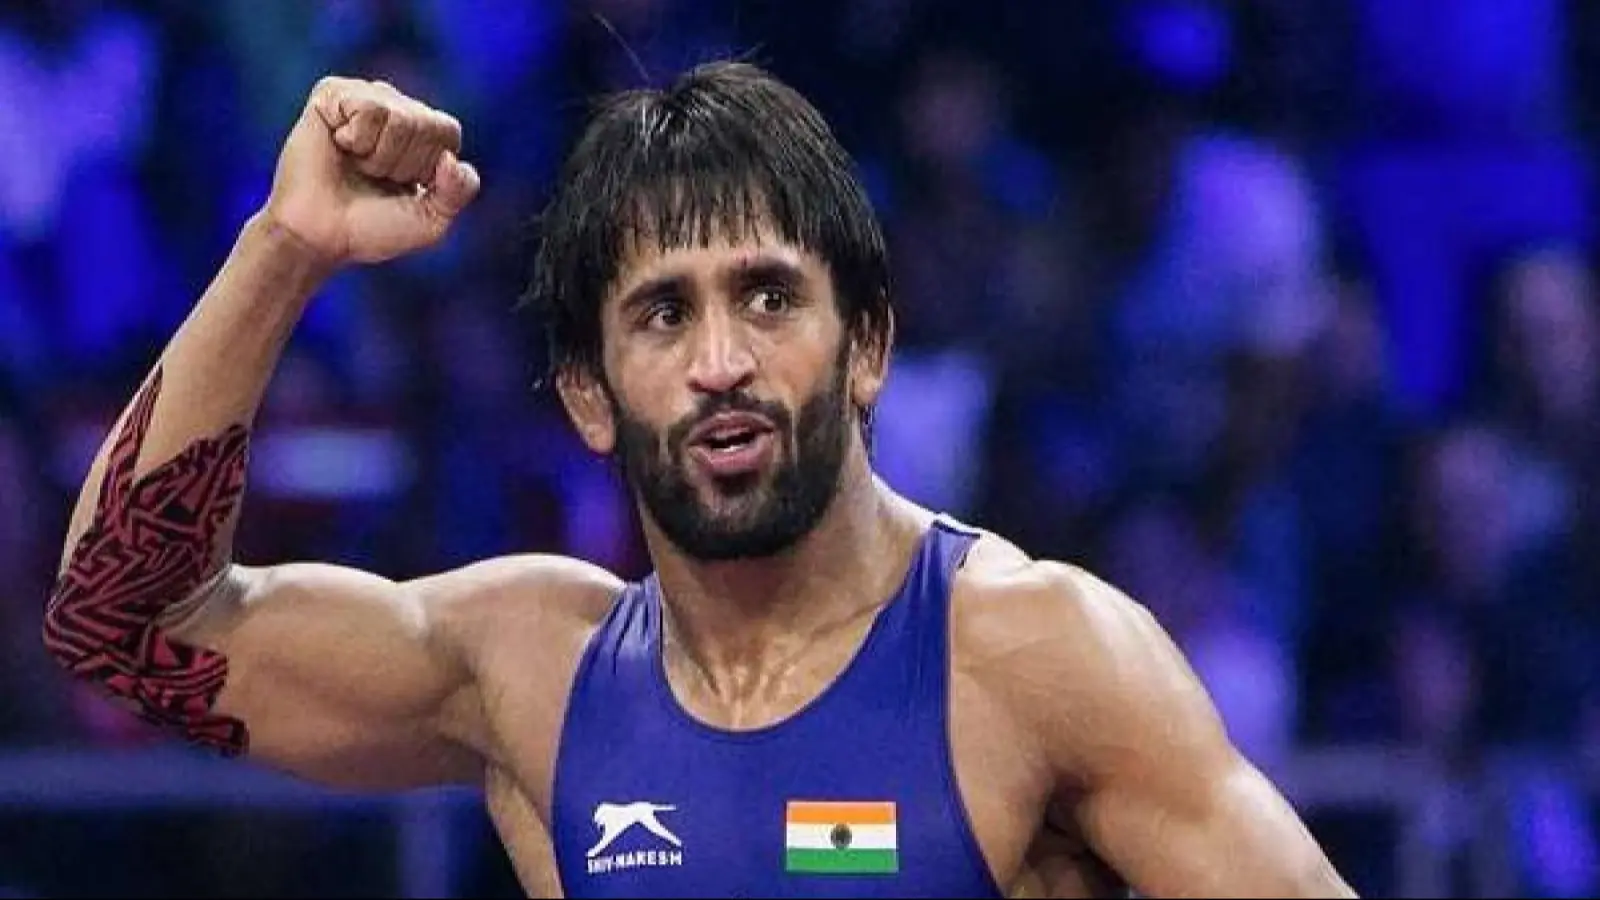 Financial assistance approved for training of table tennis and judo players with Bajrang Punia